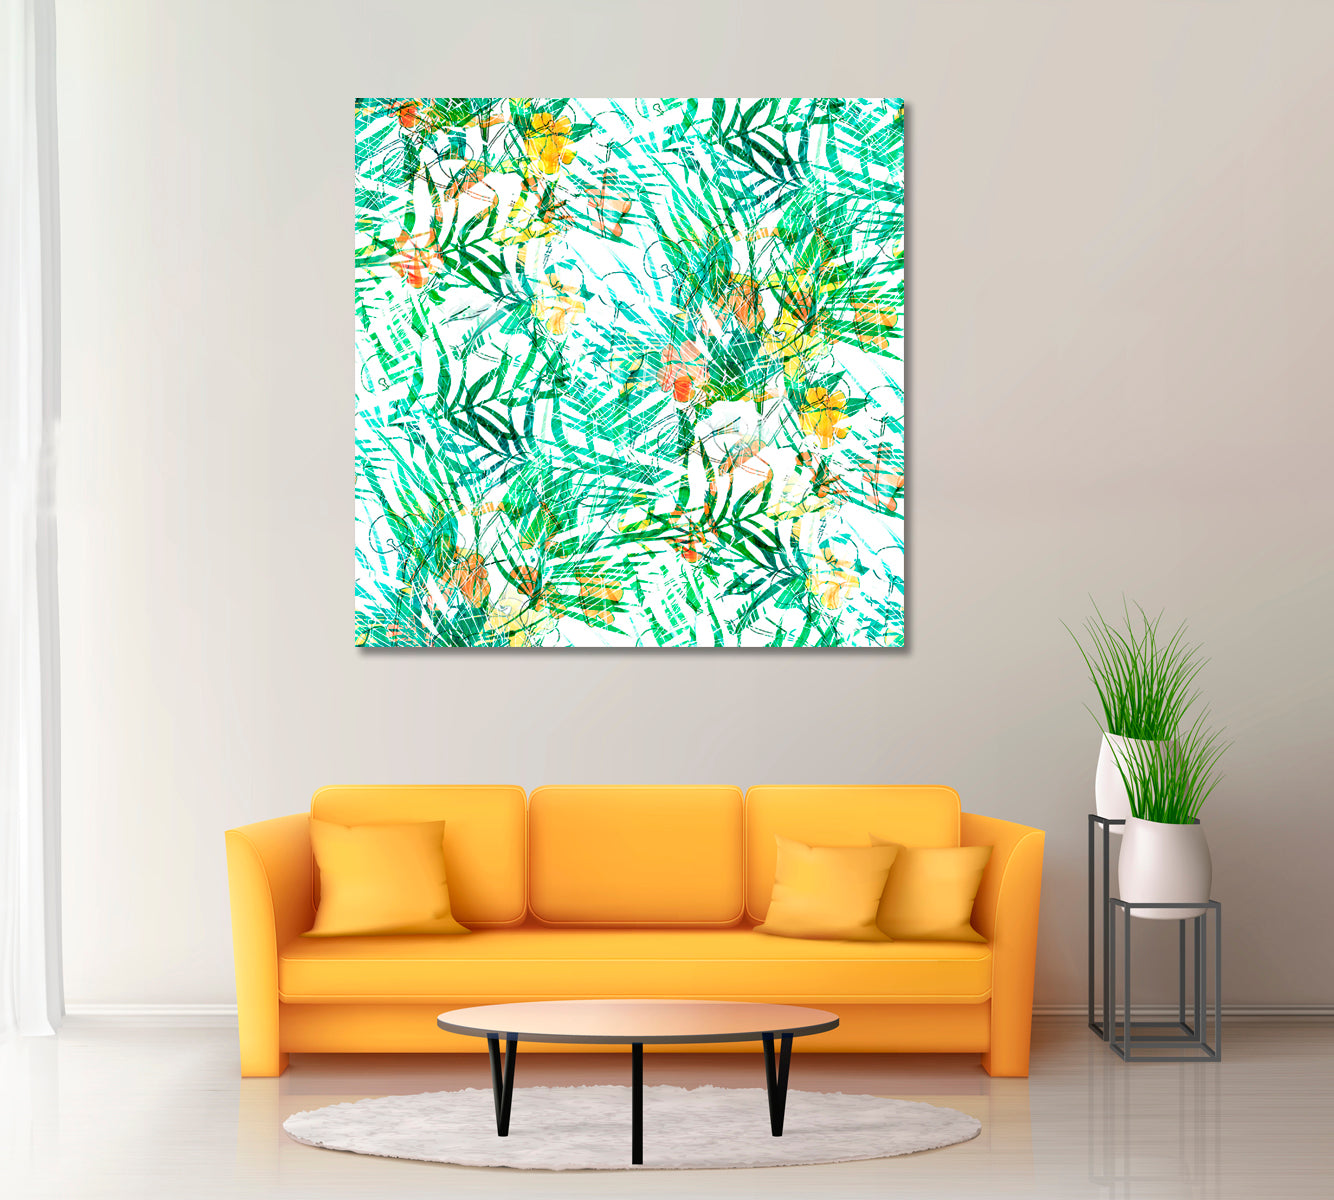 Abstract Tropical Palm Leaves Canvas Print ArtLexy 1 Panel 12"x12" inches 